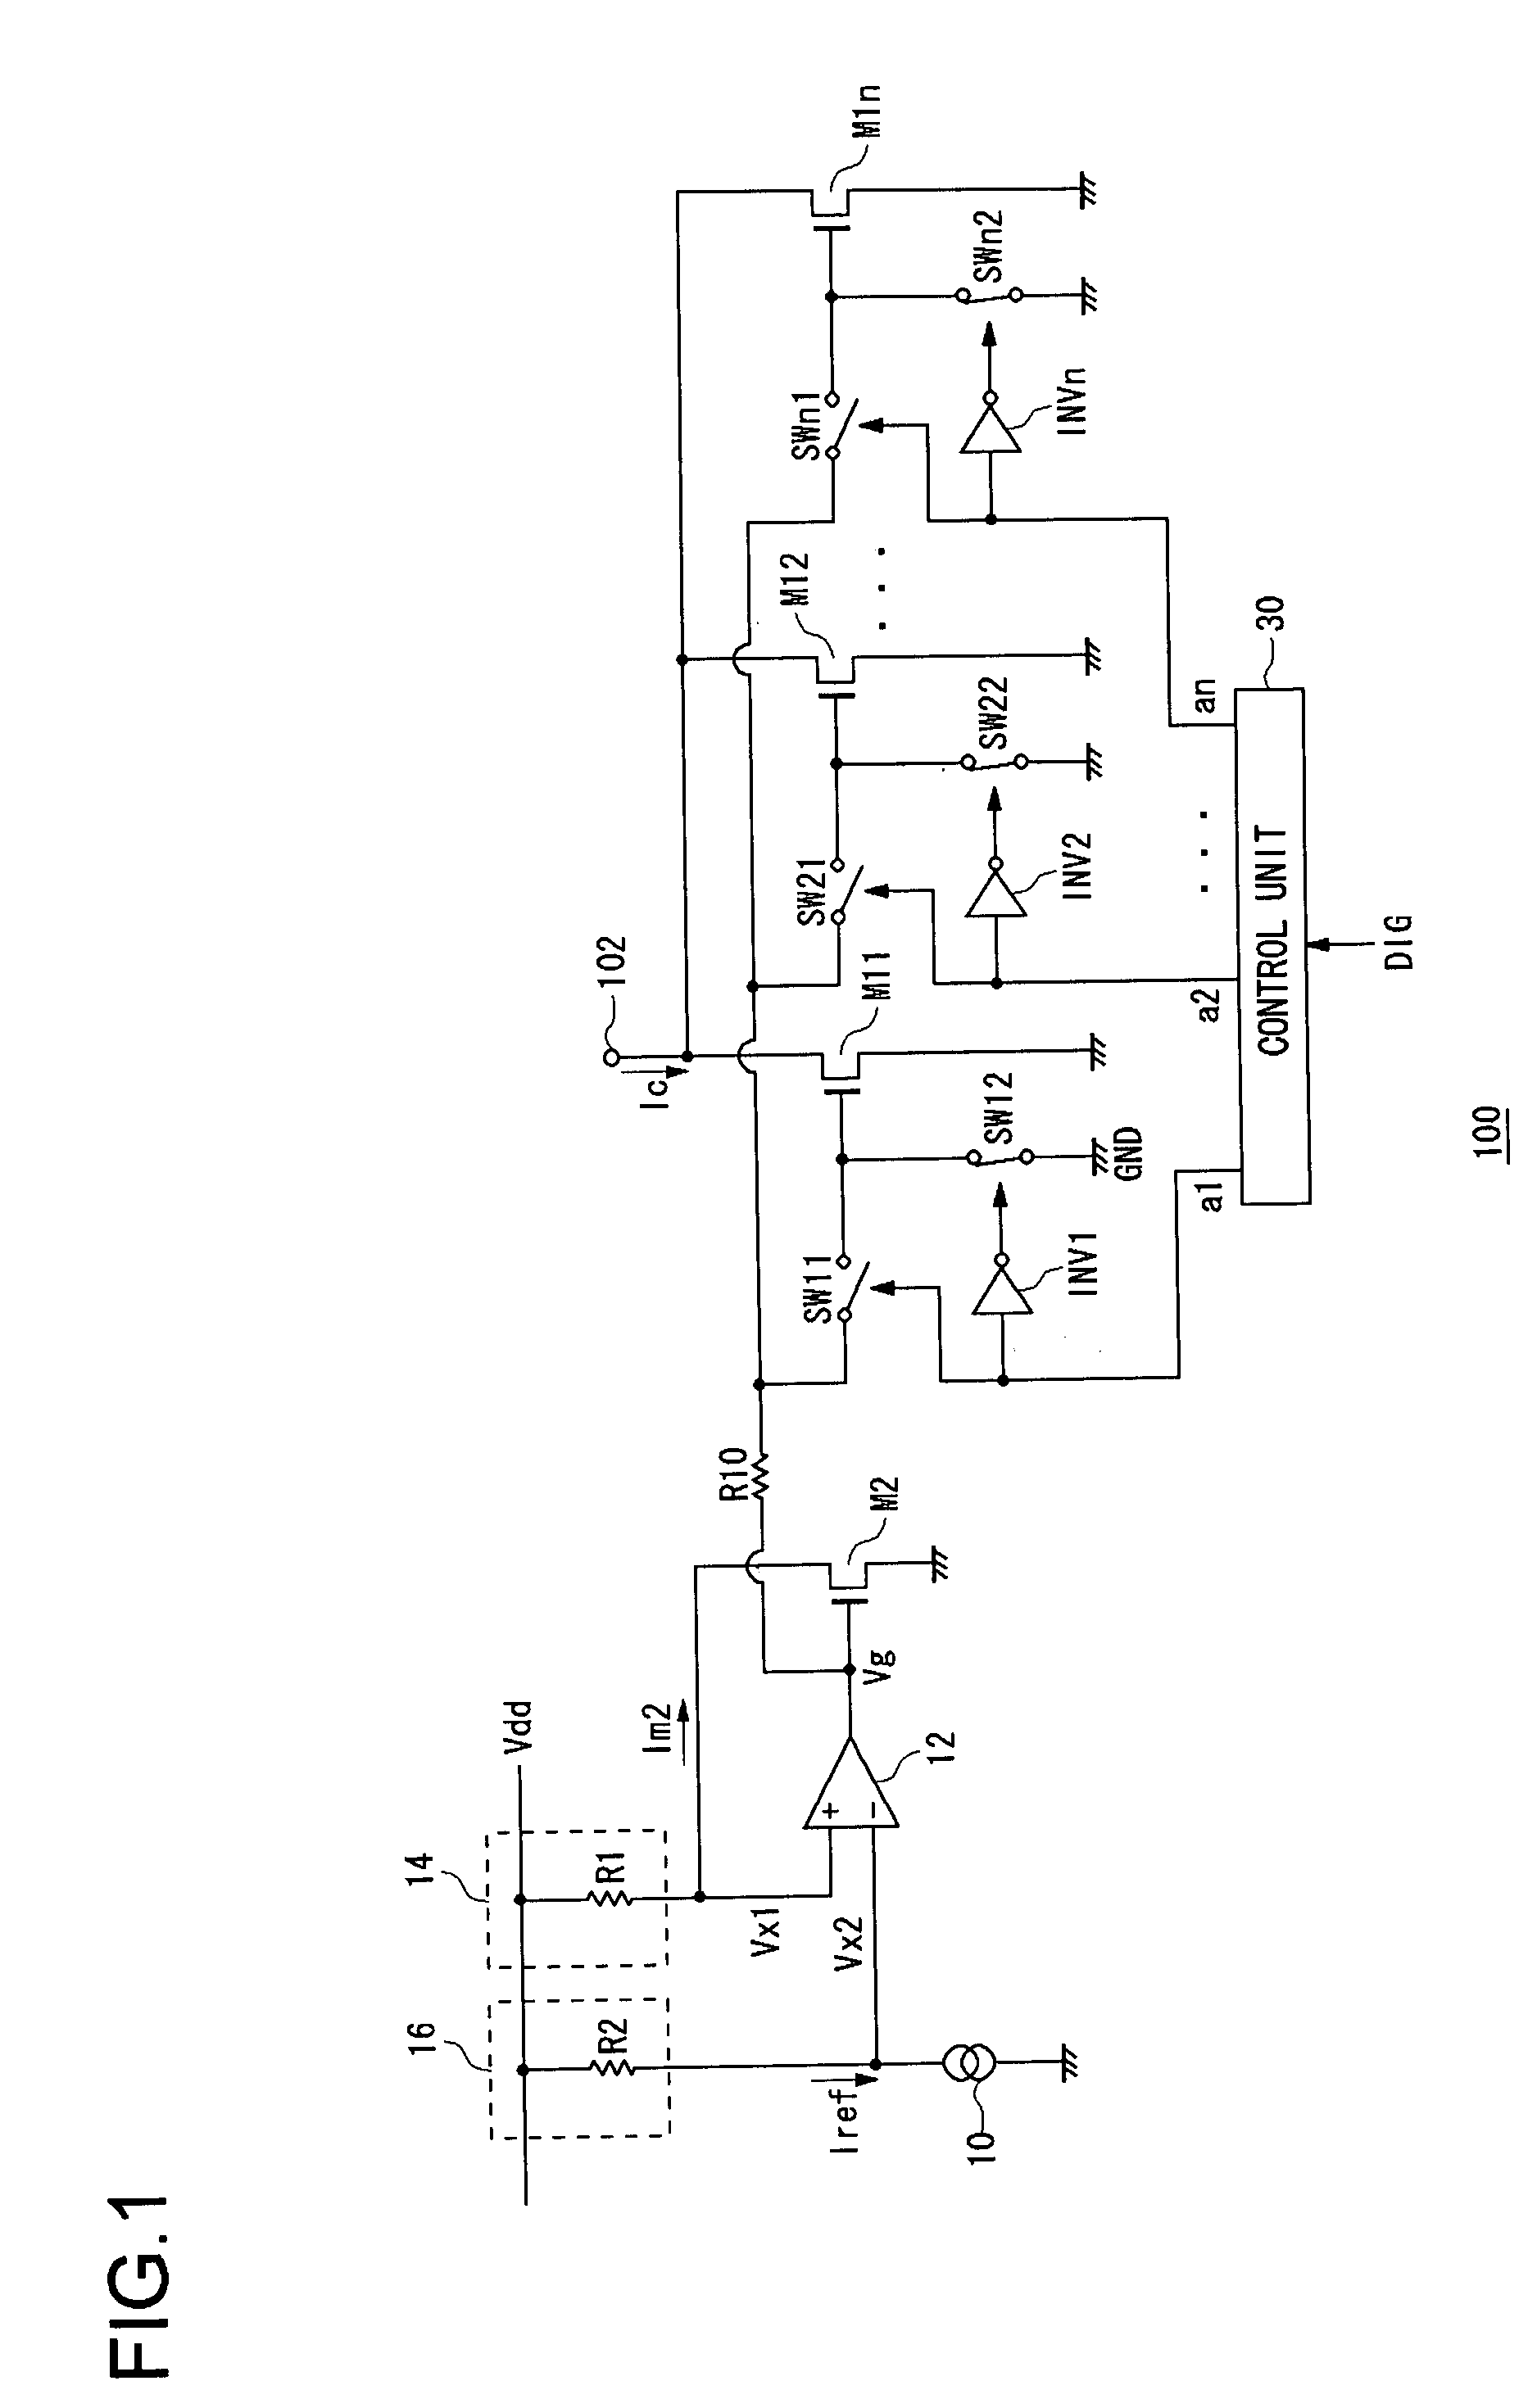 Current-output type digital-to-analog converter